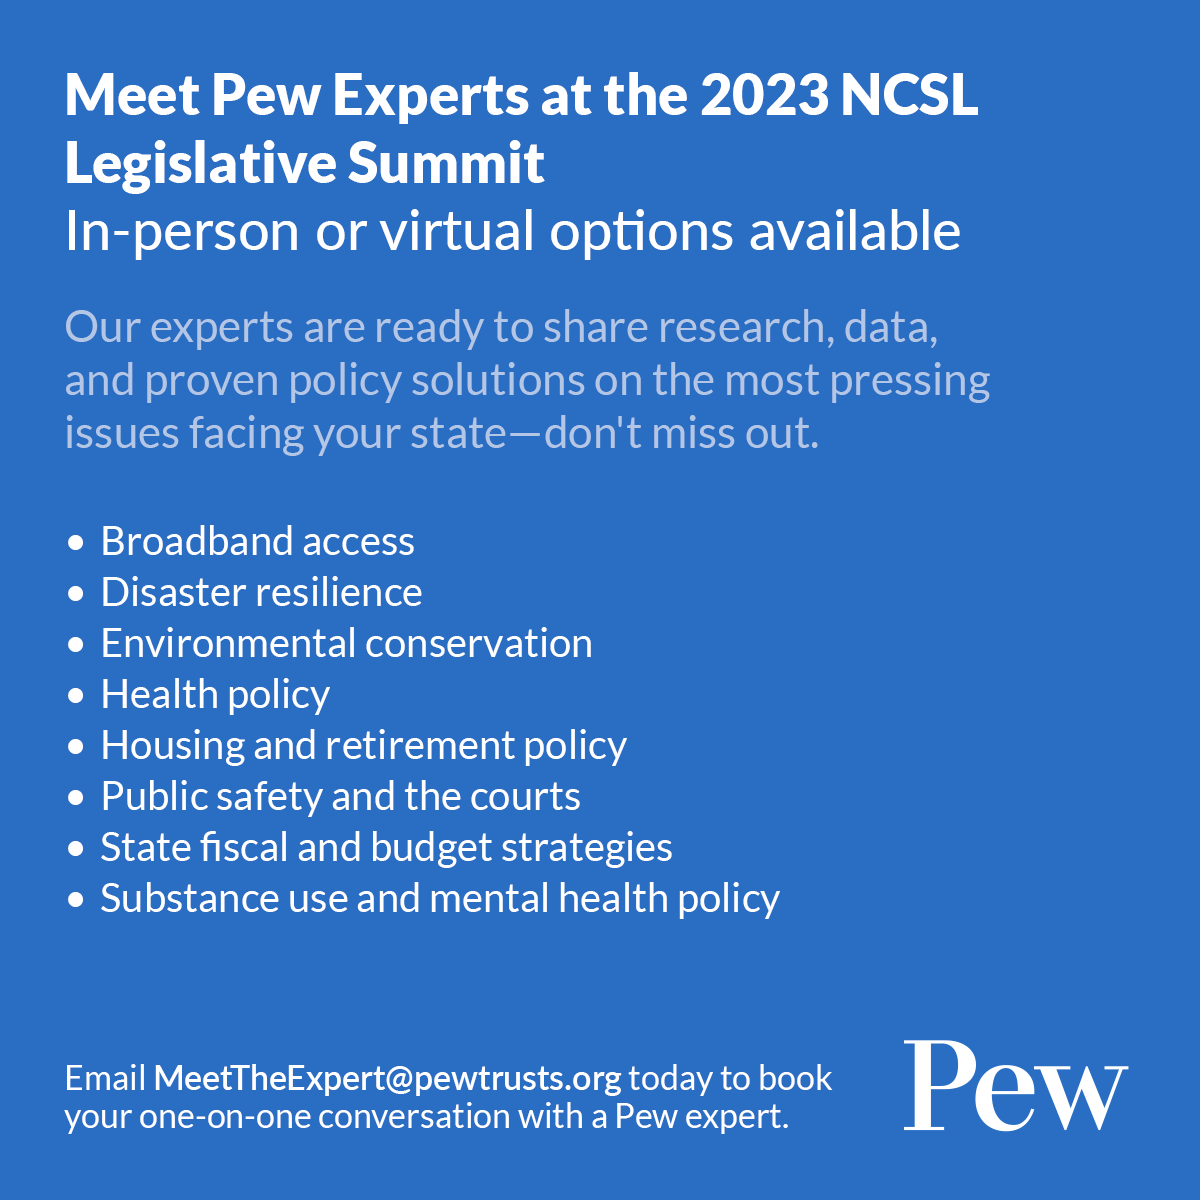 Ready to talk shop? Our state policy experts will be available to share their recent research with you one-on-one at the @NCSLorg summit or virtually (Aug. 14-16). Don't miss out on this unique opportunity—sign up today. #NCSLsummit pew.org/47tqfWE